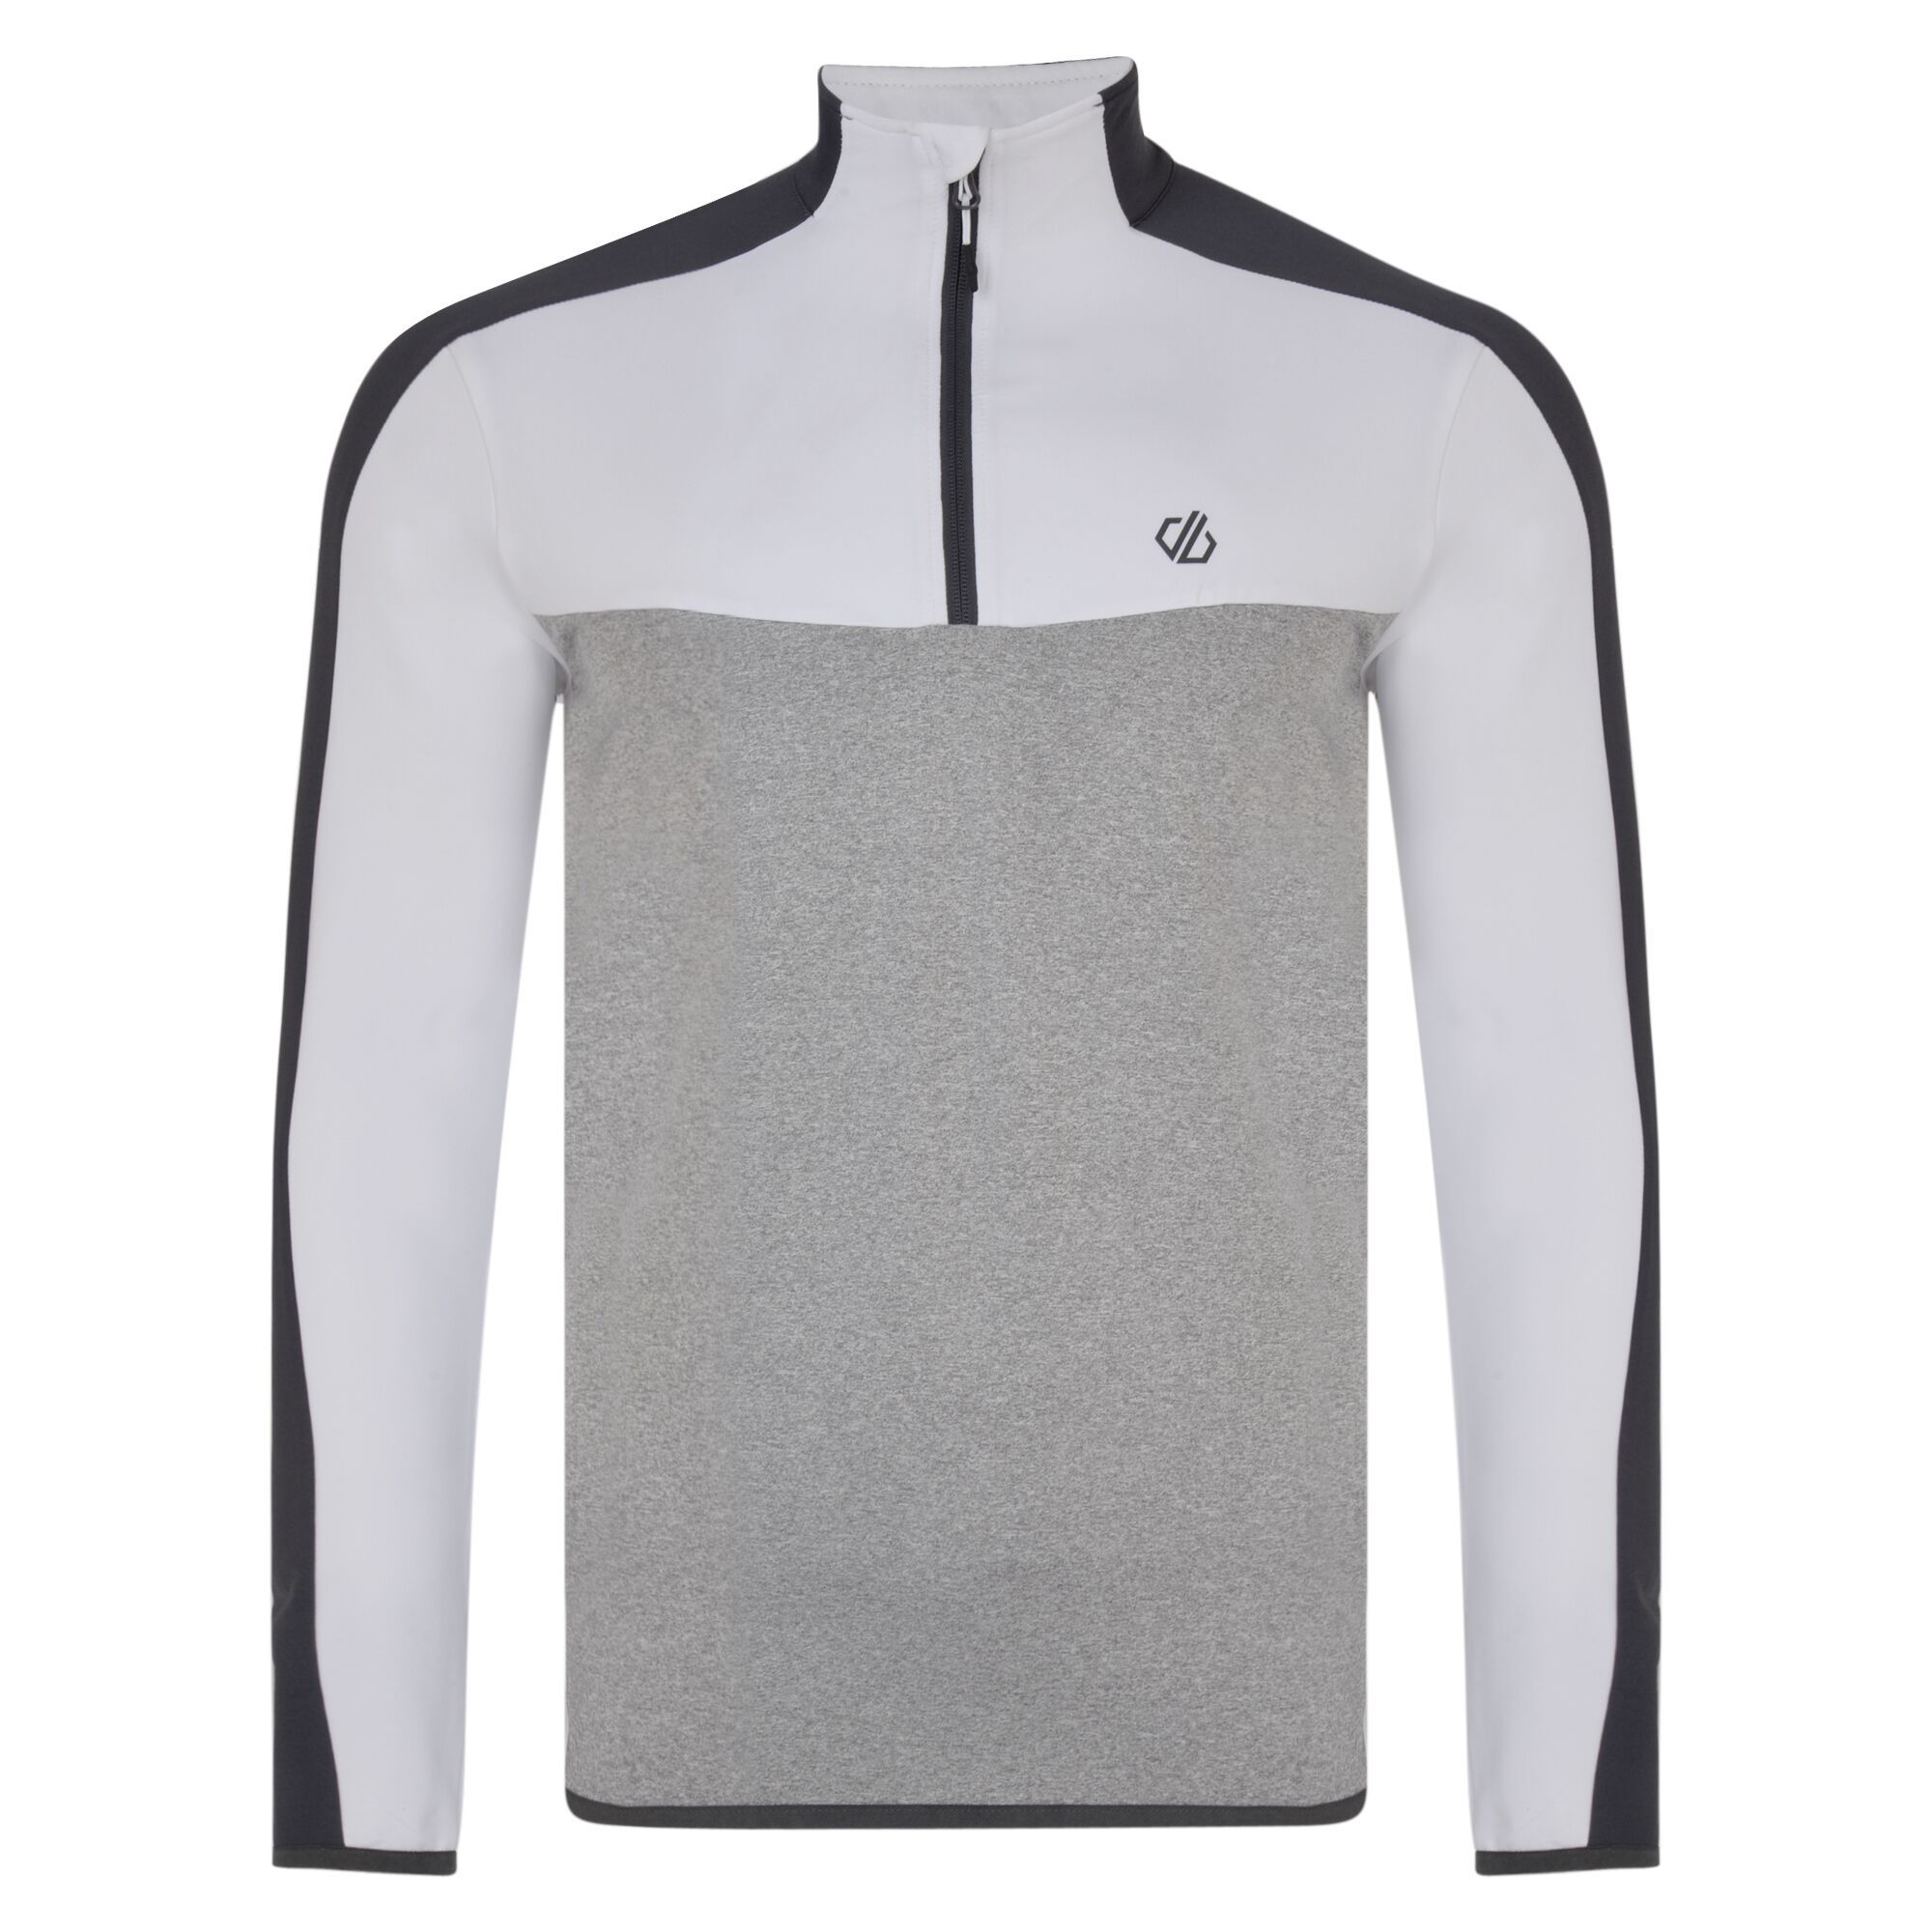 Elastane 3%, polyester 97%. Lightweight Ilus Core warm backed knitted stretch fabric. Quick drying. Half length zip with inner zip and chin guard.